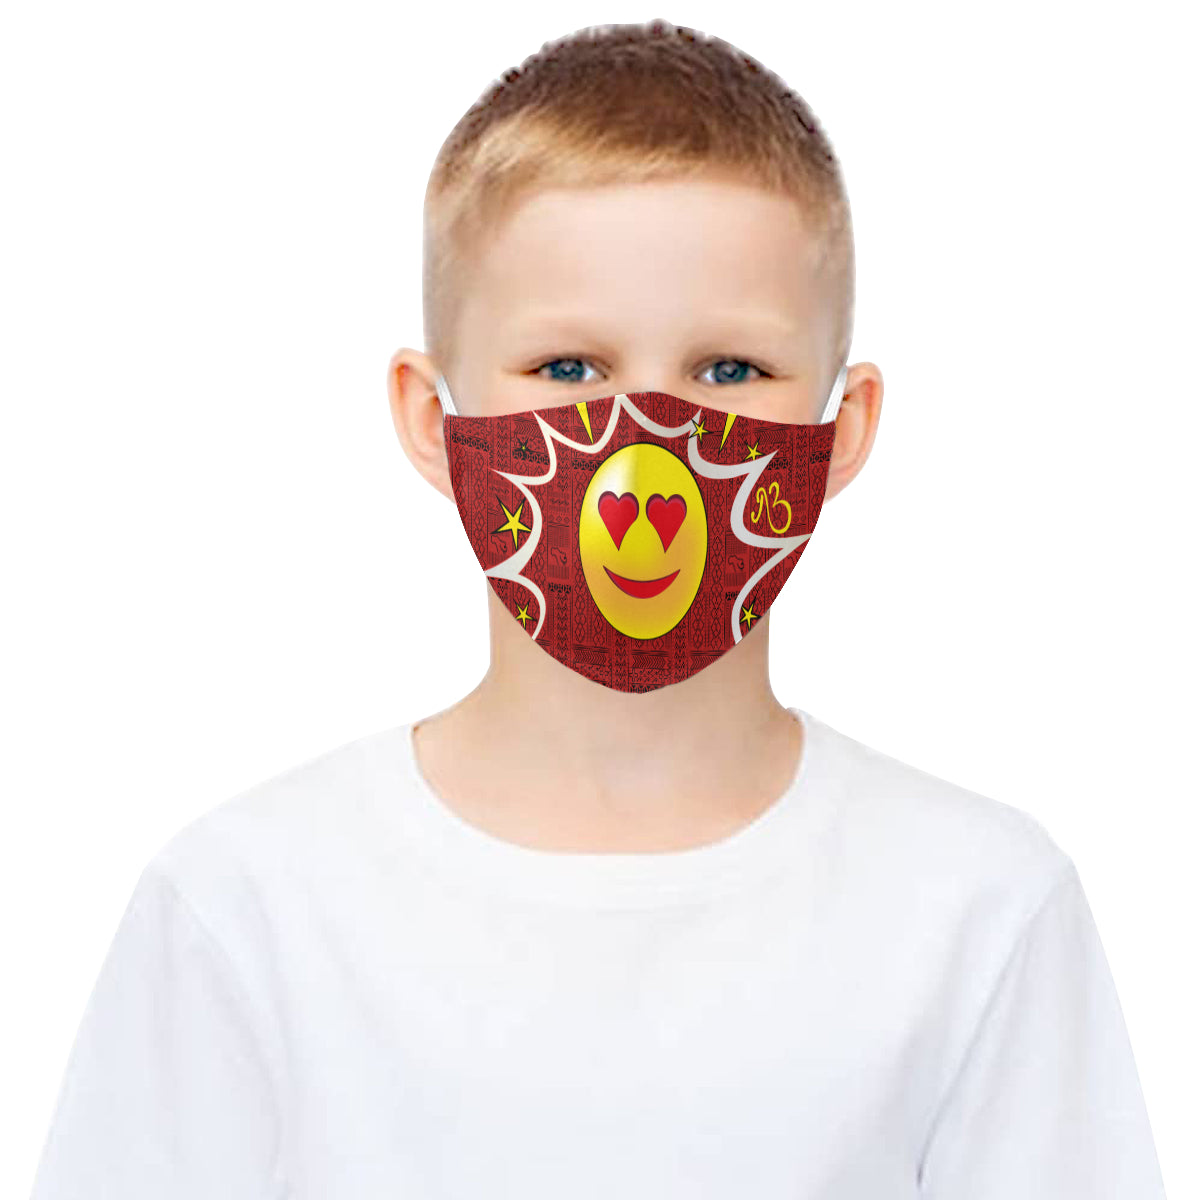 Heart Tribal Print Comic Emoji Cotton Fabric Face Mask with Filter Slot and Adjustable Strap - Non-medical use (2 Filters Included)